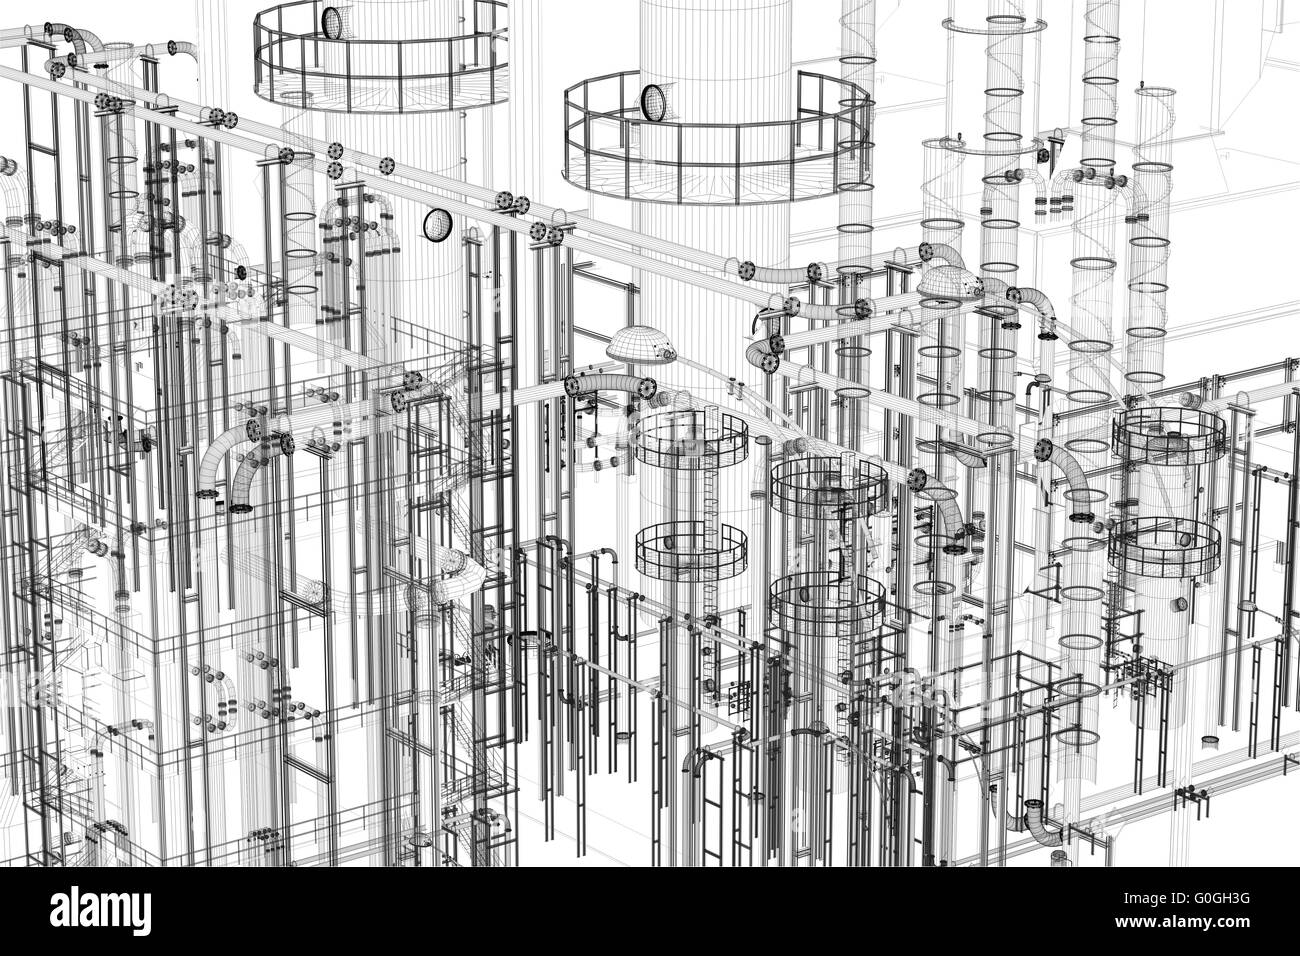 Abstract industrial, technology background. Engineering, factory Stock Photo